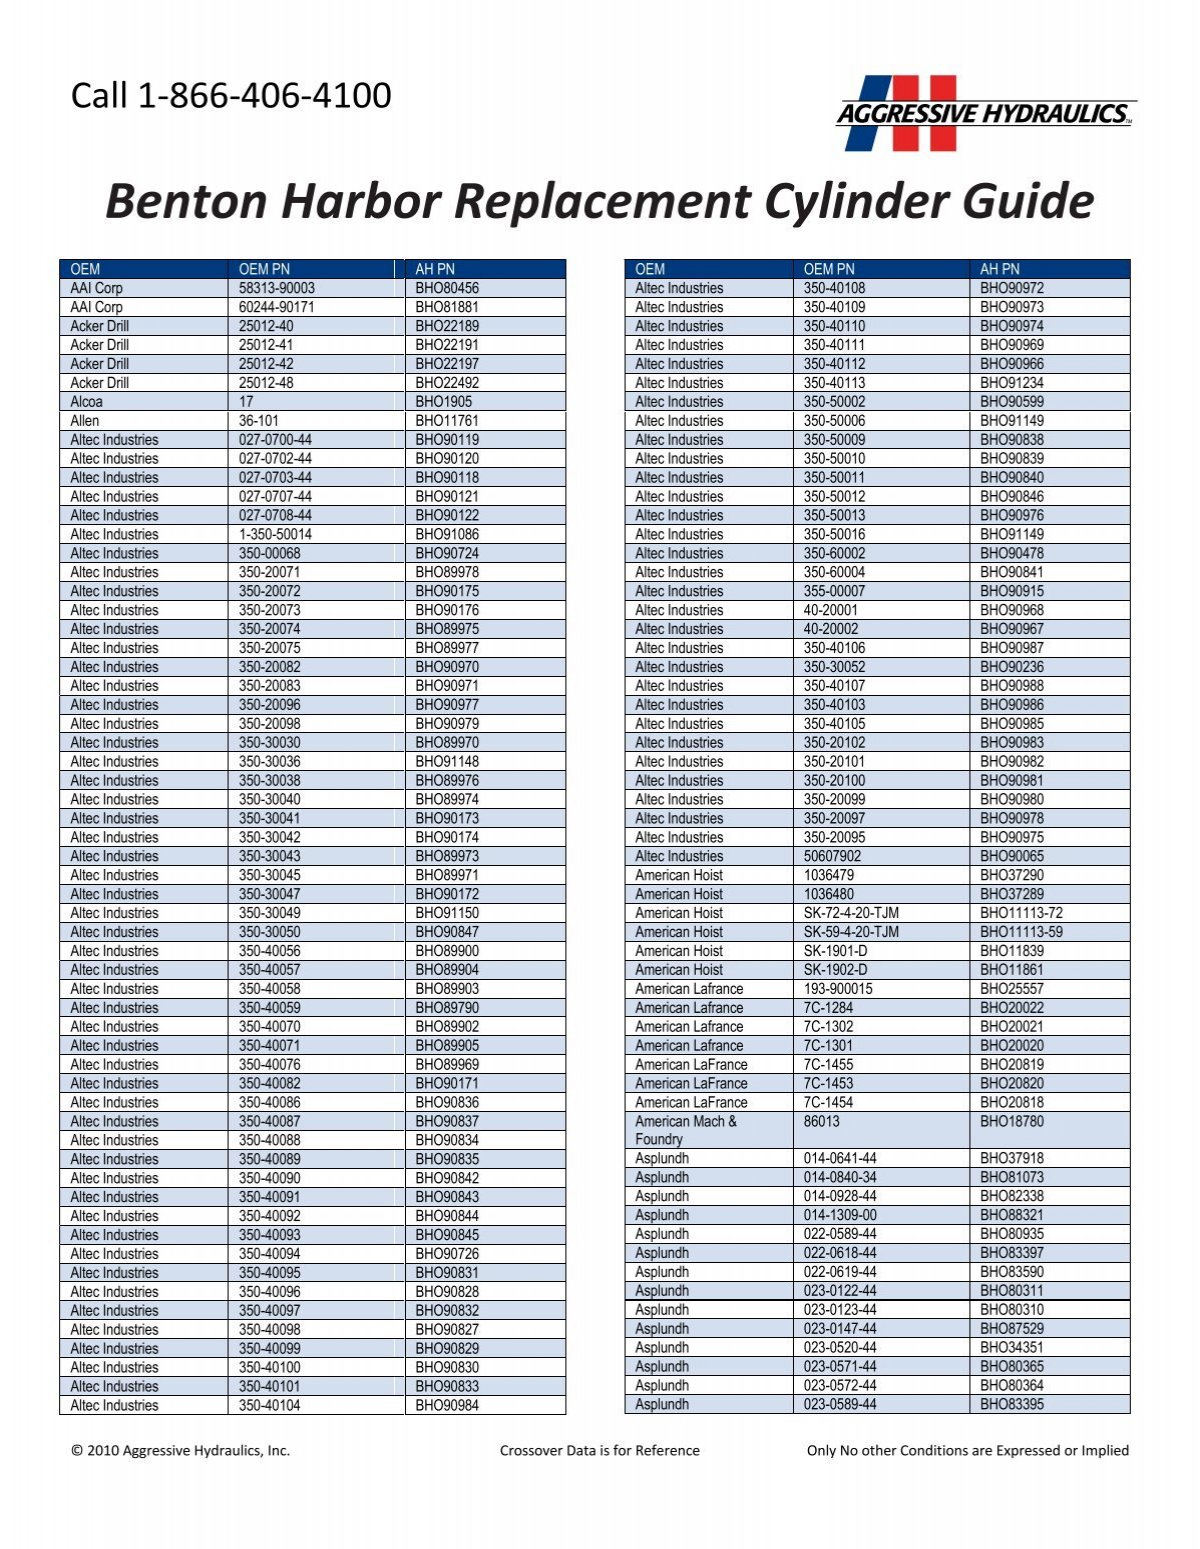 Benton Harbor Replacement Cylinder Guide - Aggressive Hydraulics